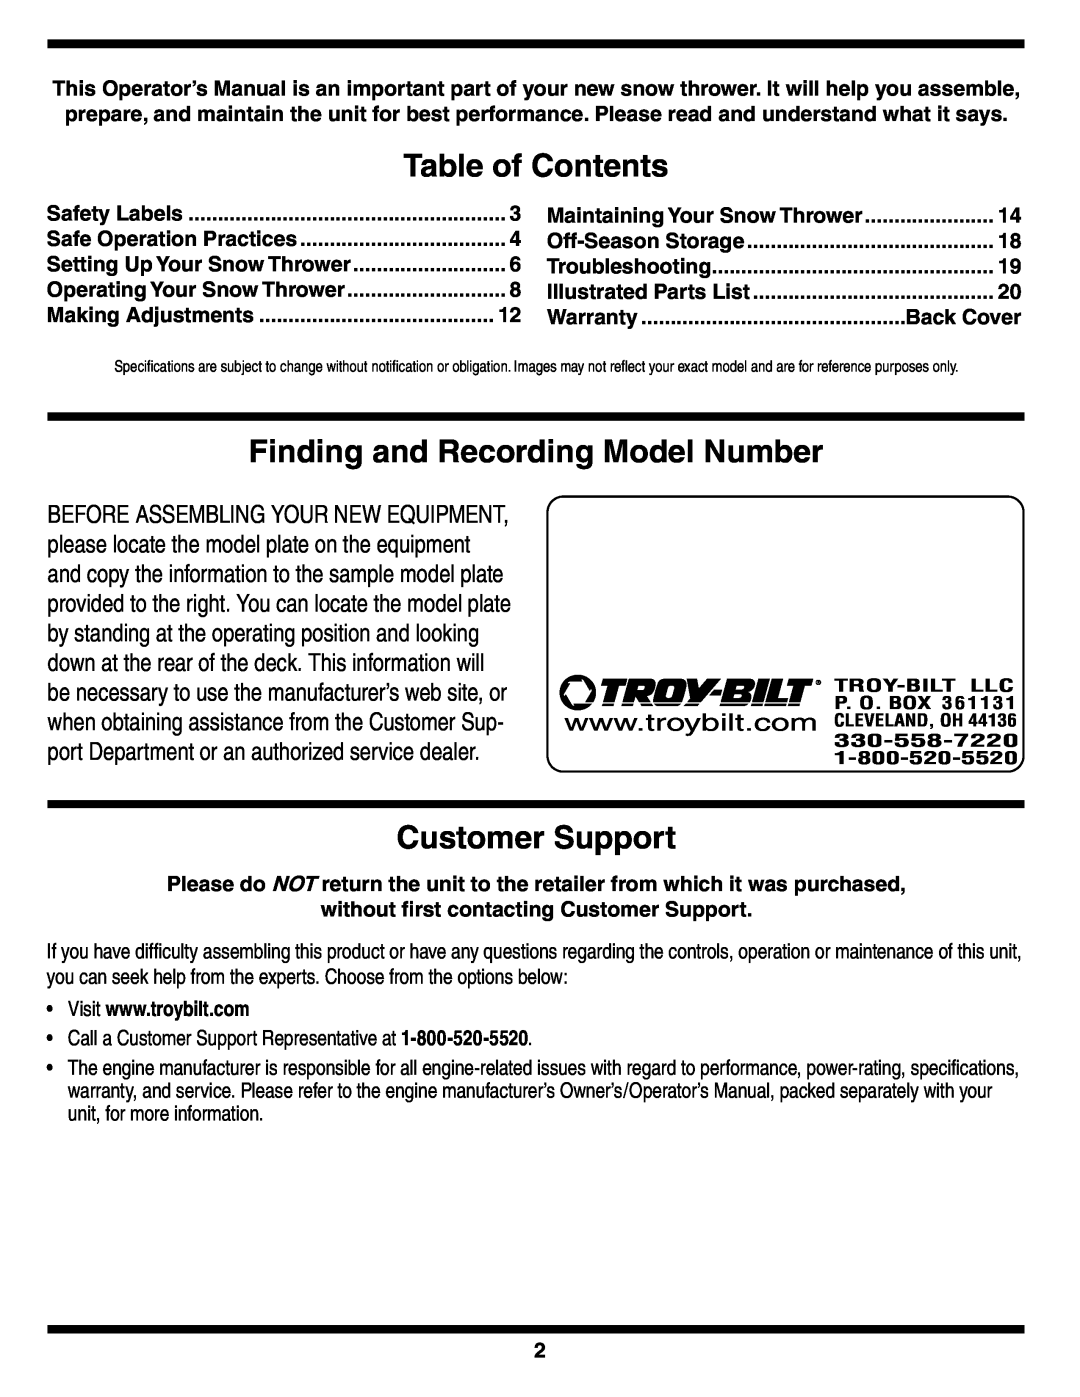 Troy-Bilt STORM Series warranty Table of Contents, Finding and Recording Model Number, Customer Support 